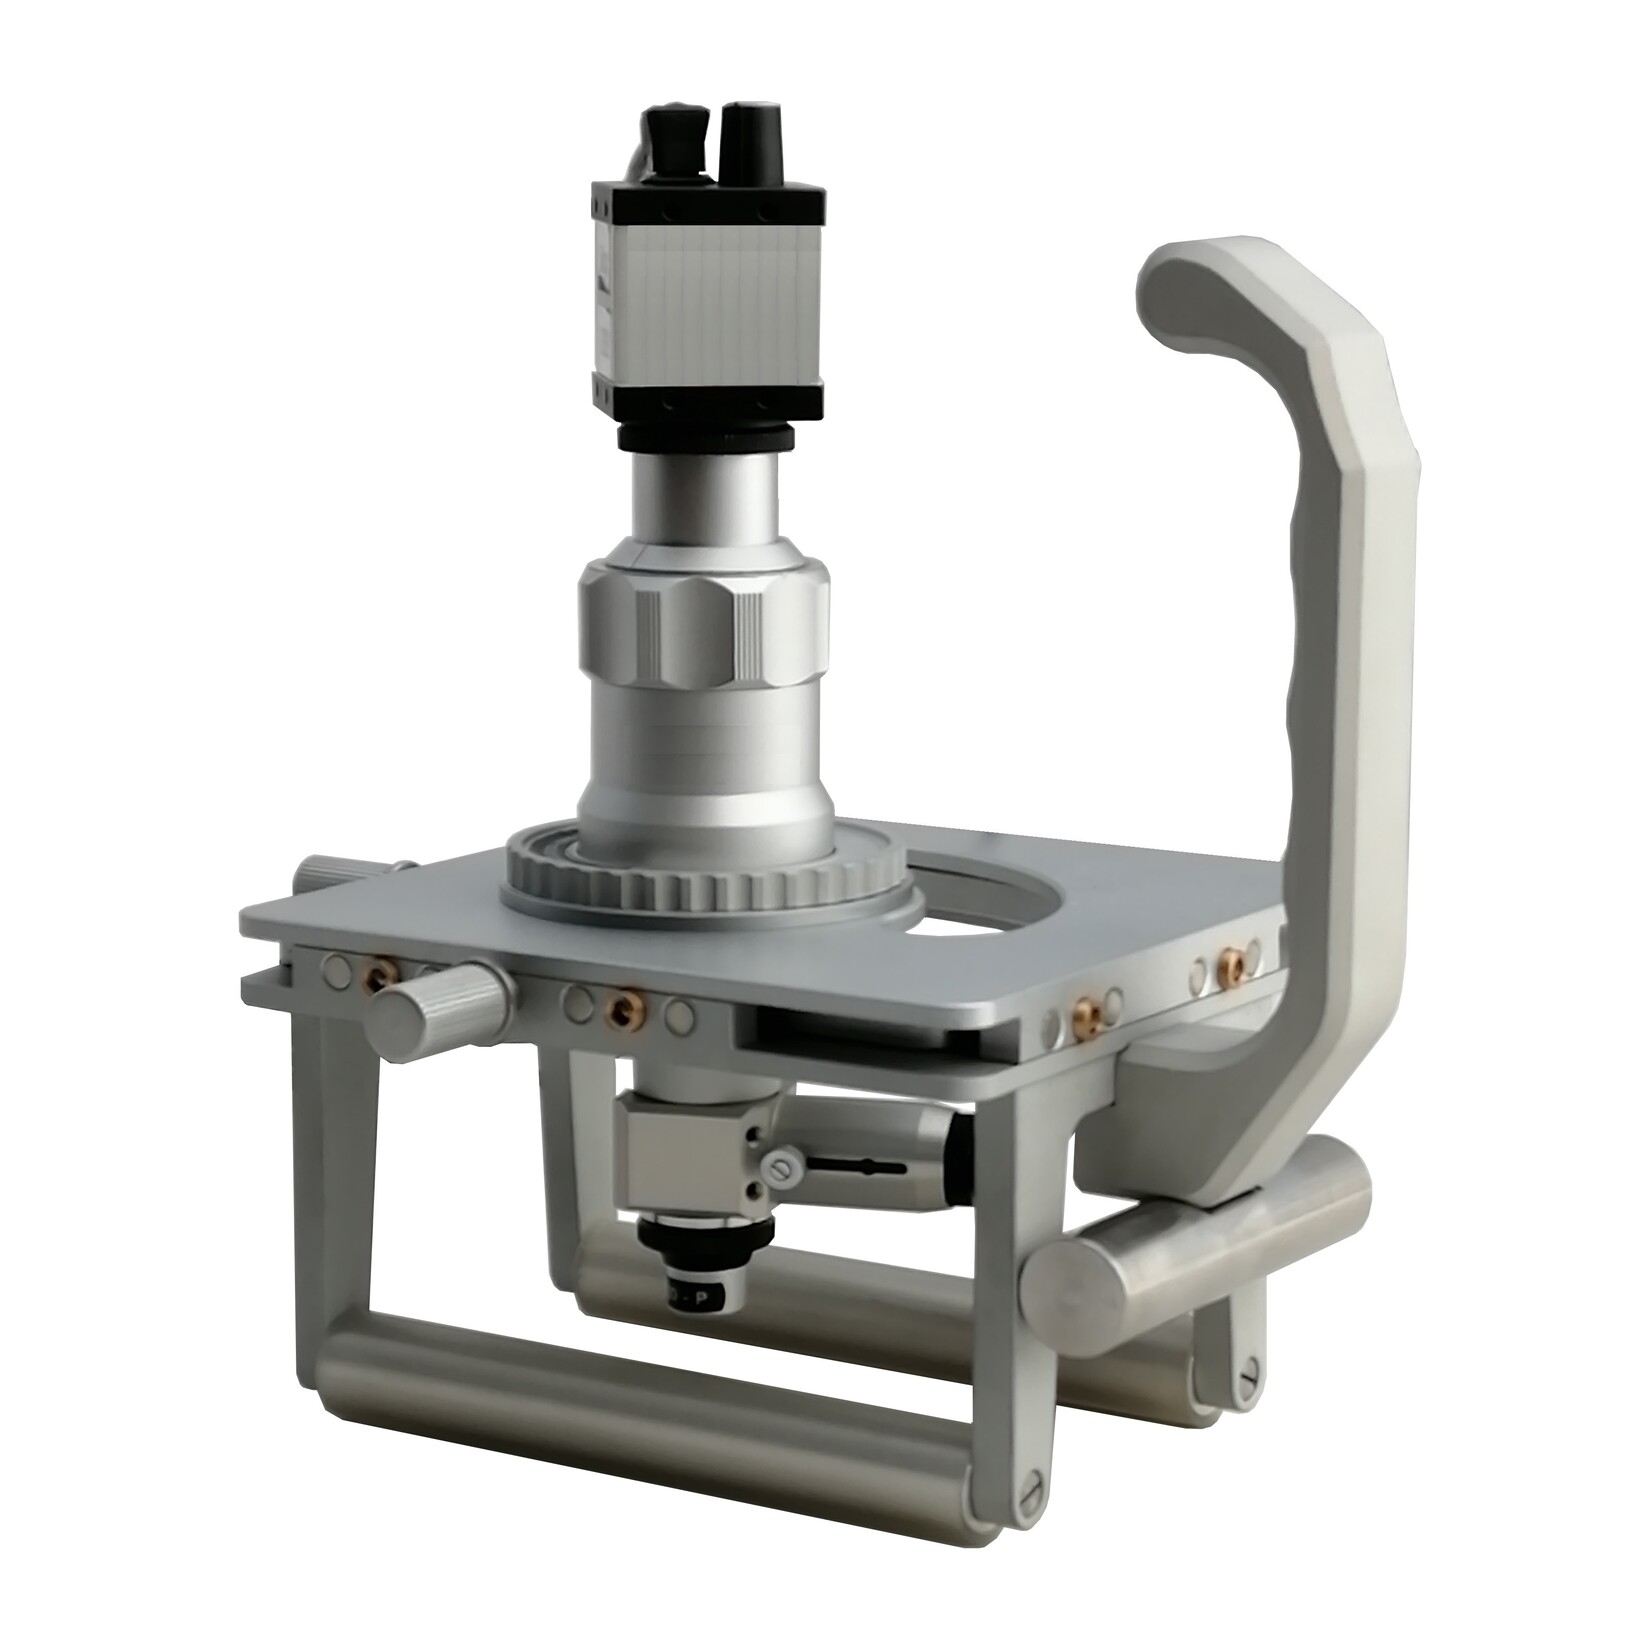 Cellcheck CIL-XY: Mobile metallurgy microscope for high-precision 2D measurements